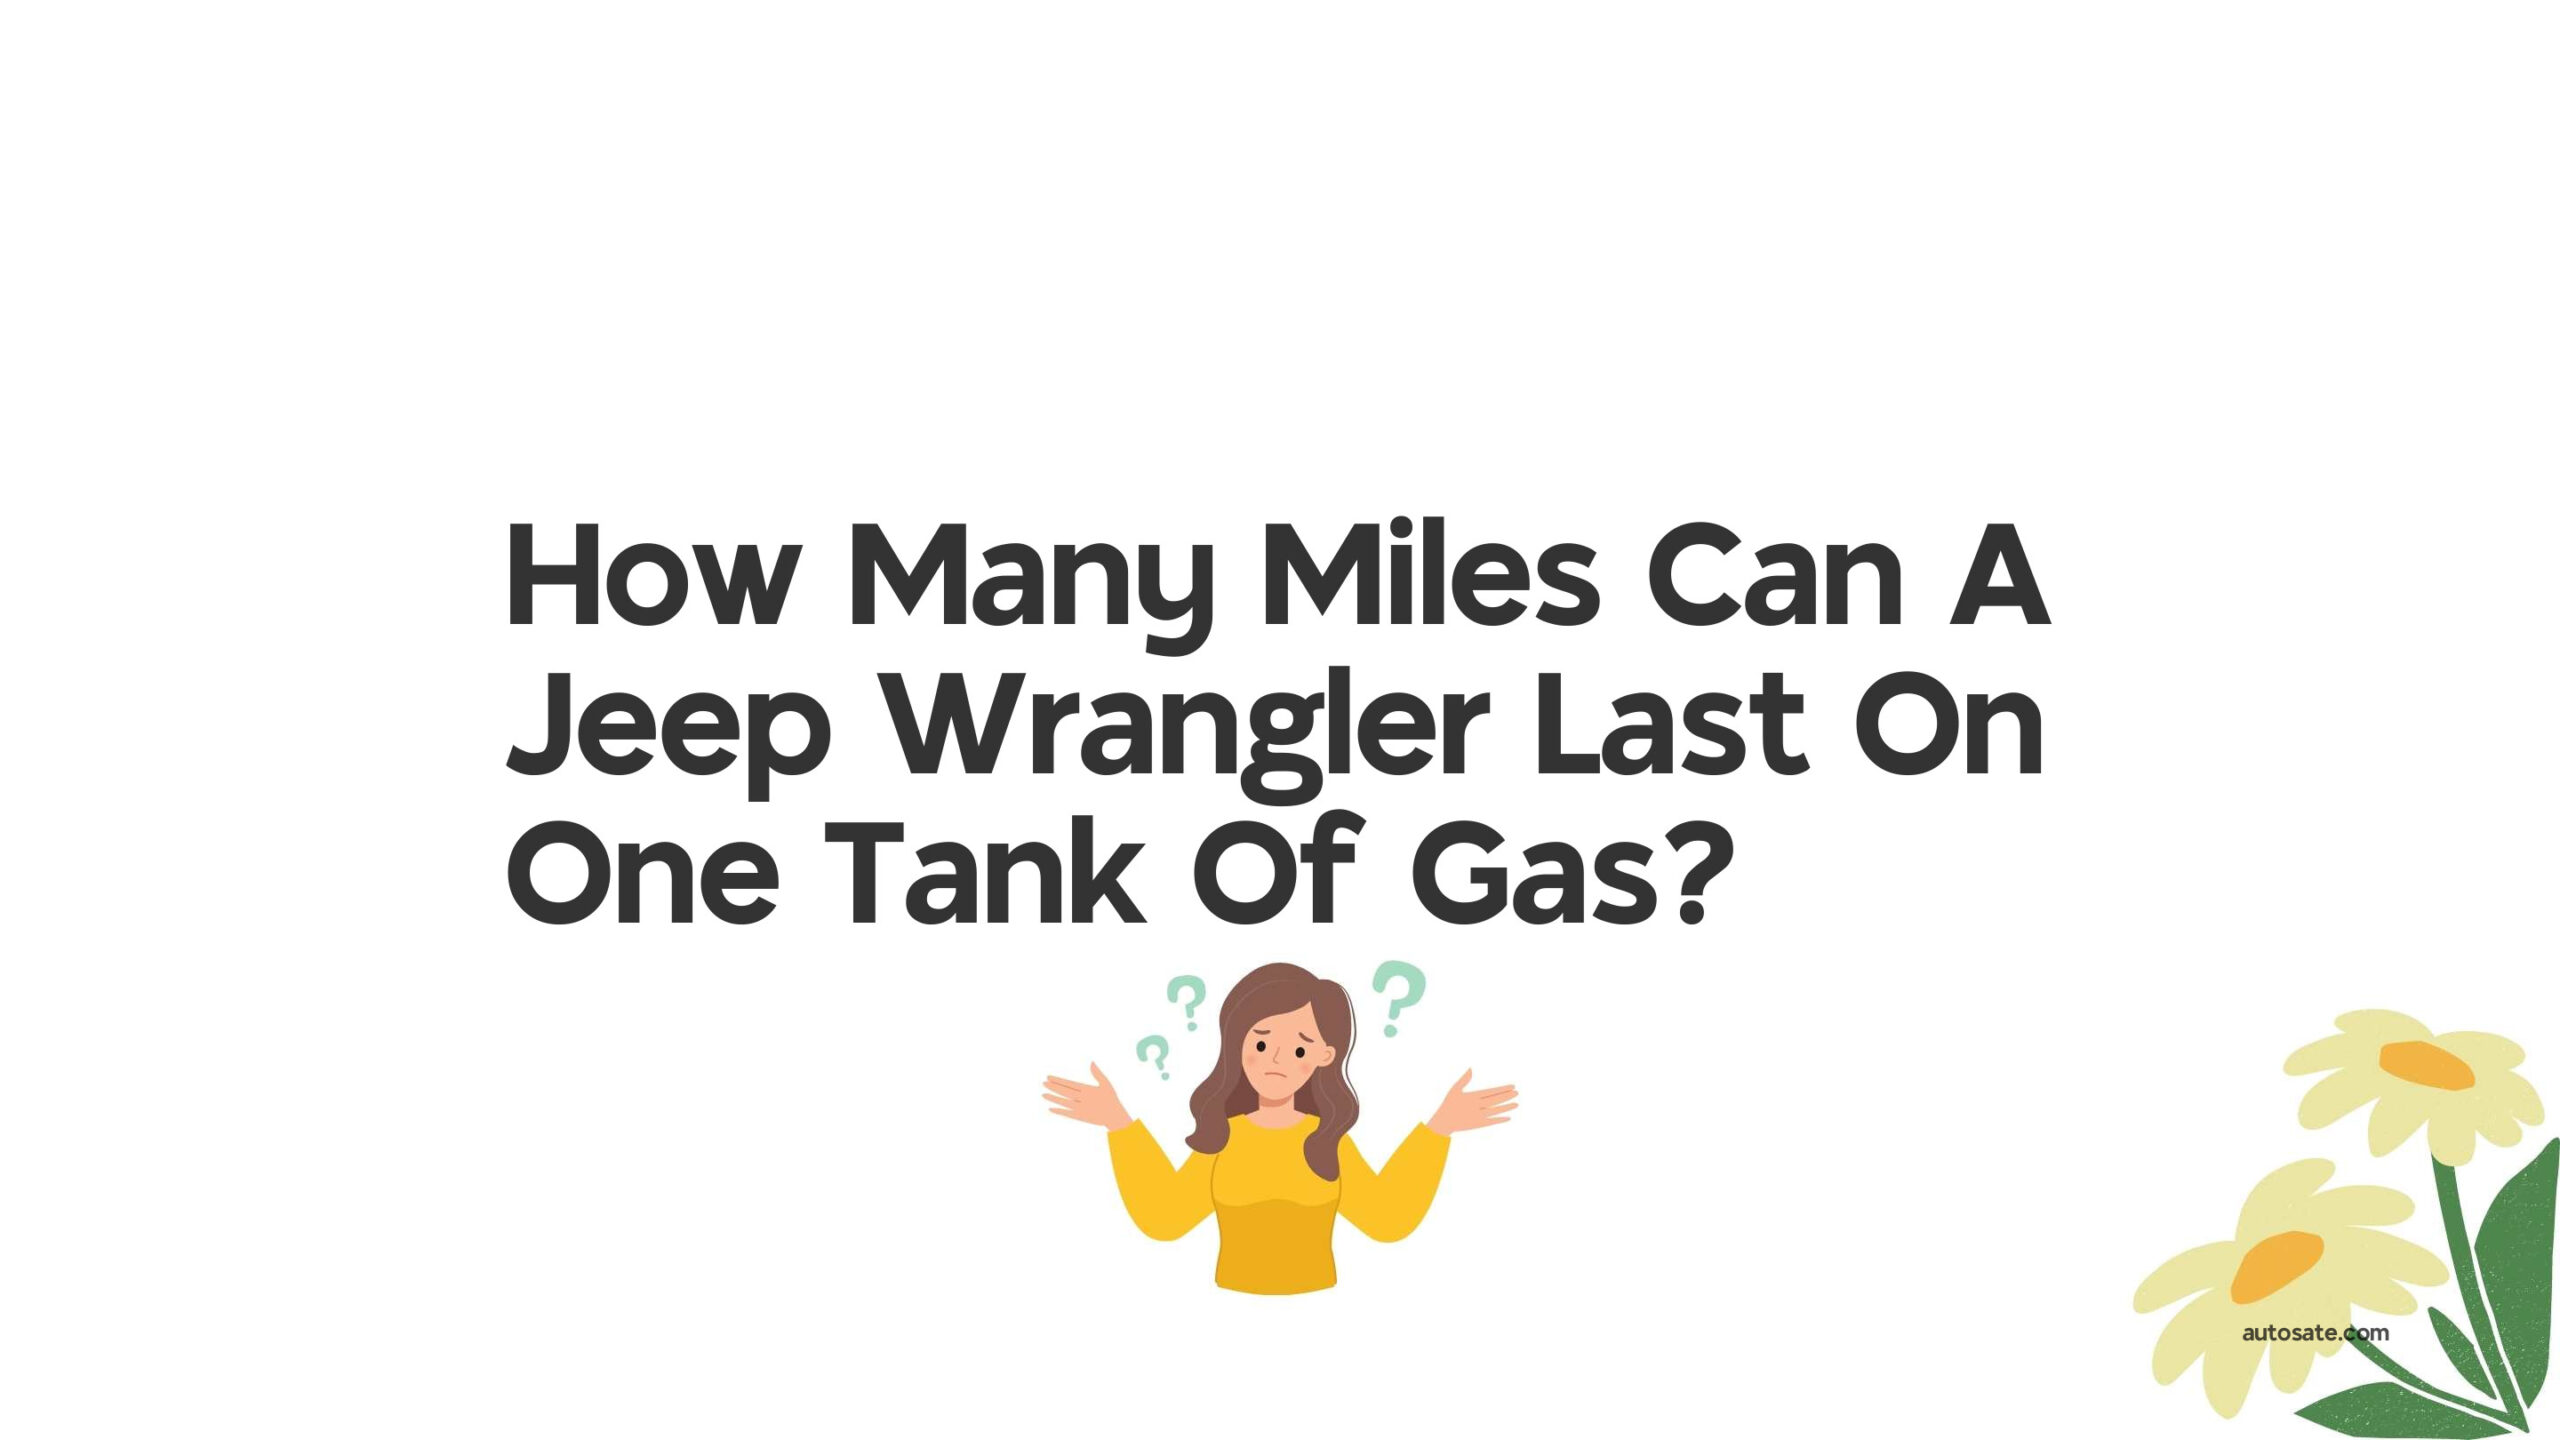 How Many Miles Can A Jeep Wrangler Last On One Tank Of Gas?